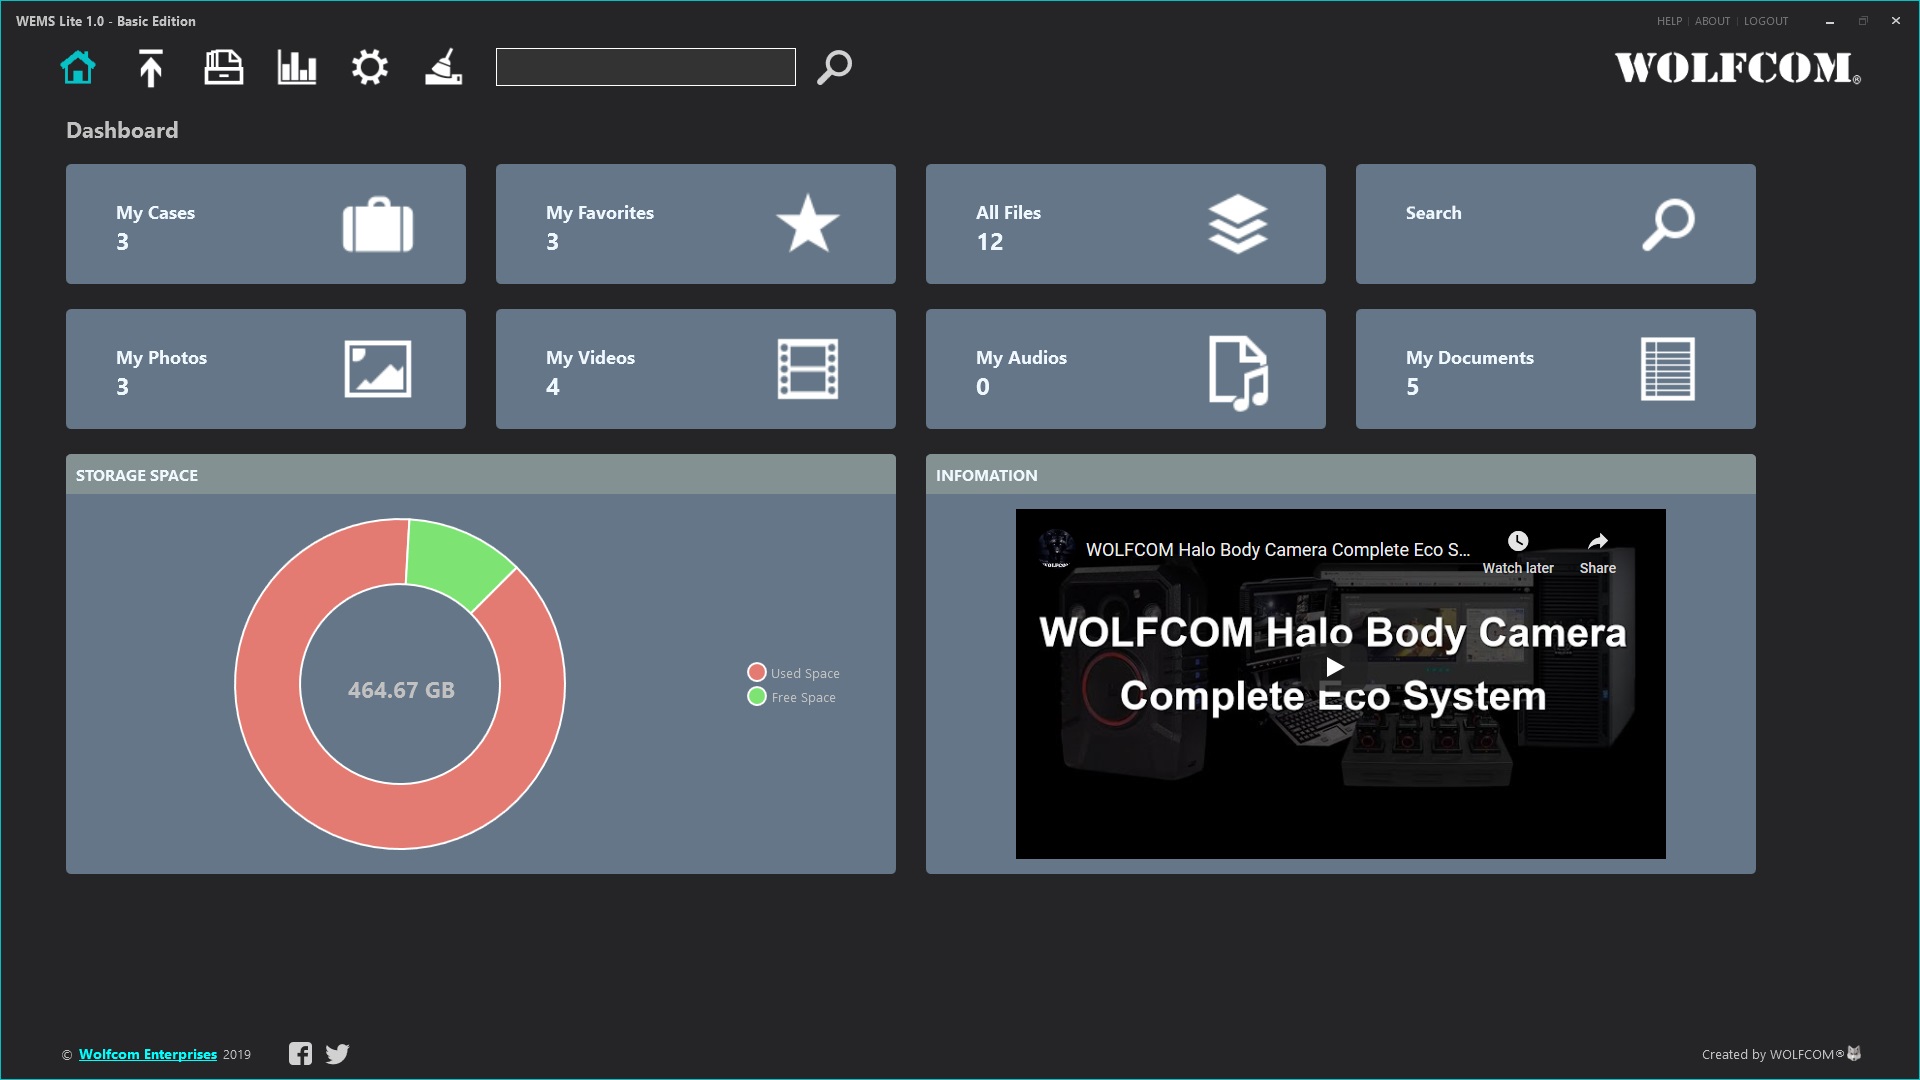 WOLFCOM now offers WEMS Lite, a free evidence management software for anyone to use